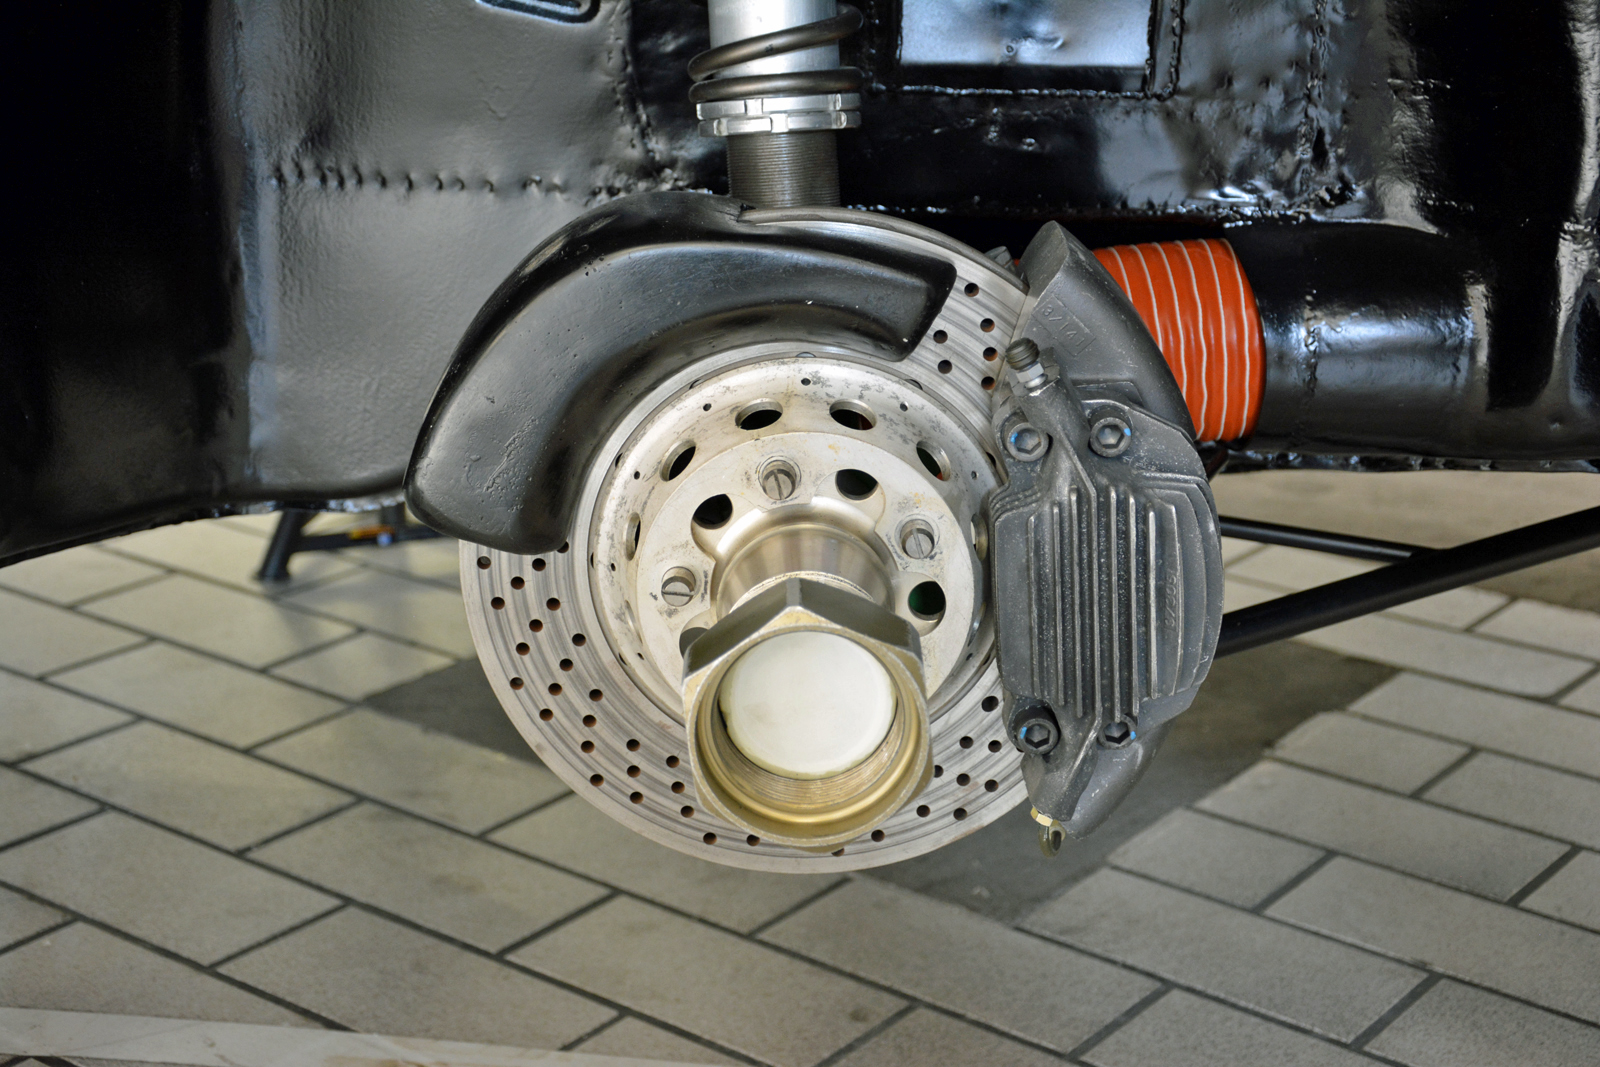 <p>The 911’s stock brakes weren’t enough to safely bring the RSR’s turbocharged fury to a stop. The mechanical upgrades consequently included a model-specific braking system with drilled rotors and 917-style finned brake calipers. The RSR also received center-locking wheels and a revised suspension setup.</p>